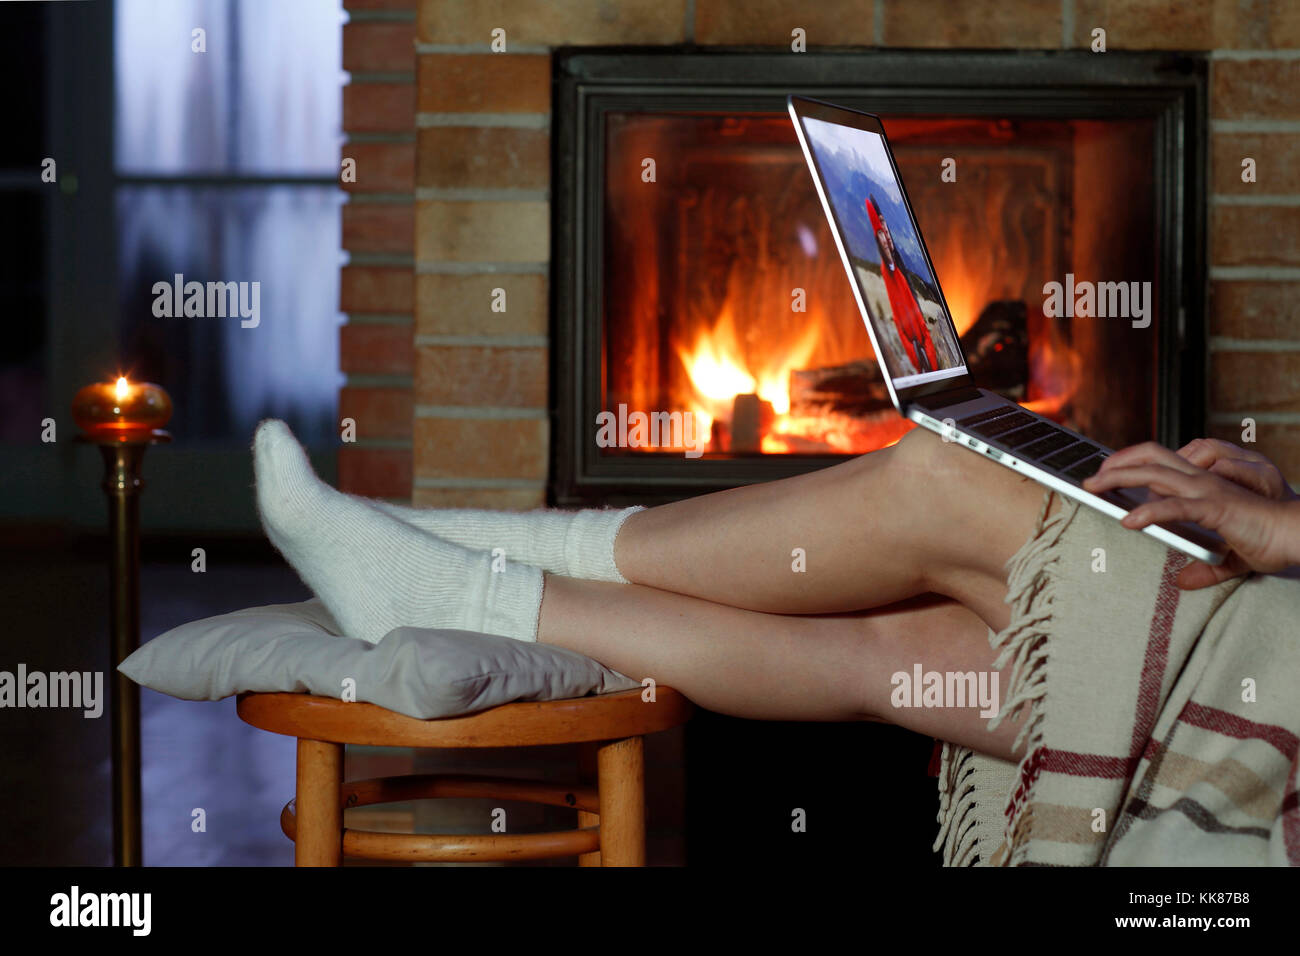 Female Legs, Rest by the Fireplace, Fireplace, Laptop, Work, Hands on the Keyboard, Relax Stock Photo